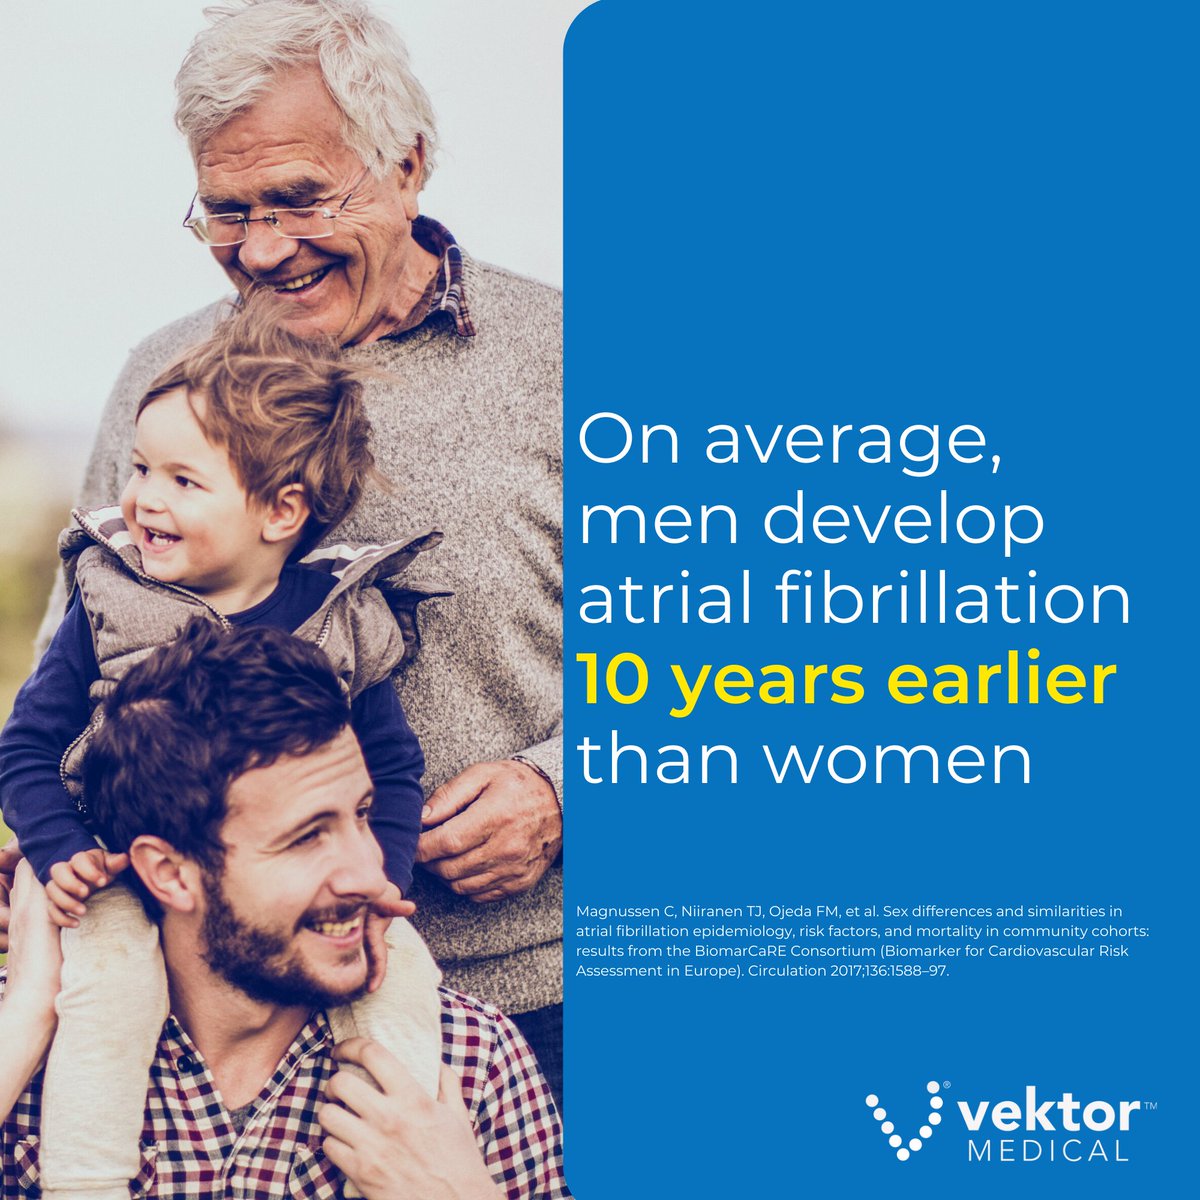 Not only is #AFib more prevalent in men, but it also develops earlier on average compared to women.

Tech powered by #ComputationalModeling and #MachineLearning can optimize and improve outcomes for cardiac #ablation: vektormedical.com/vmap

#MensHealthMonth #EPeeps #EPlab